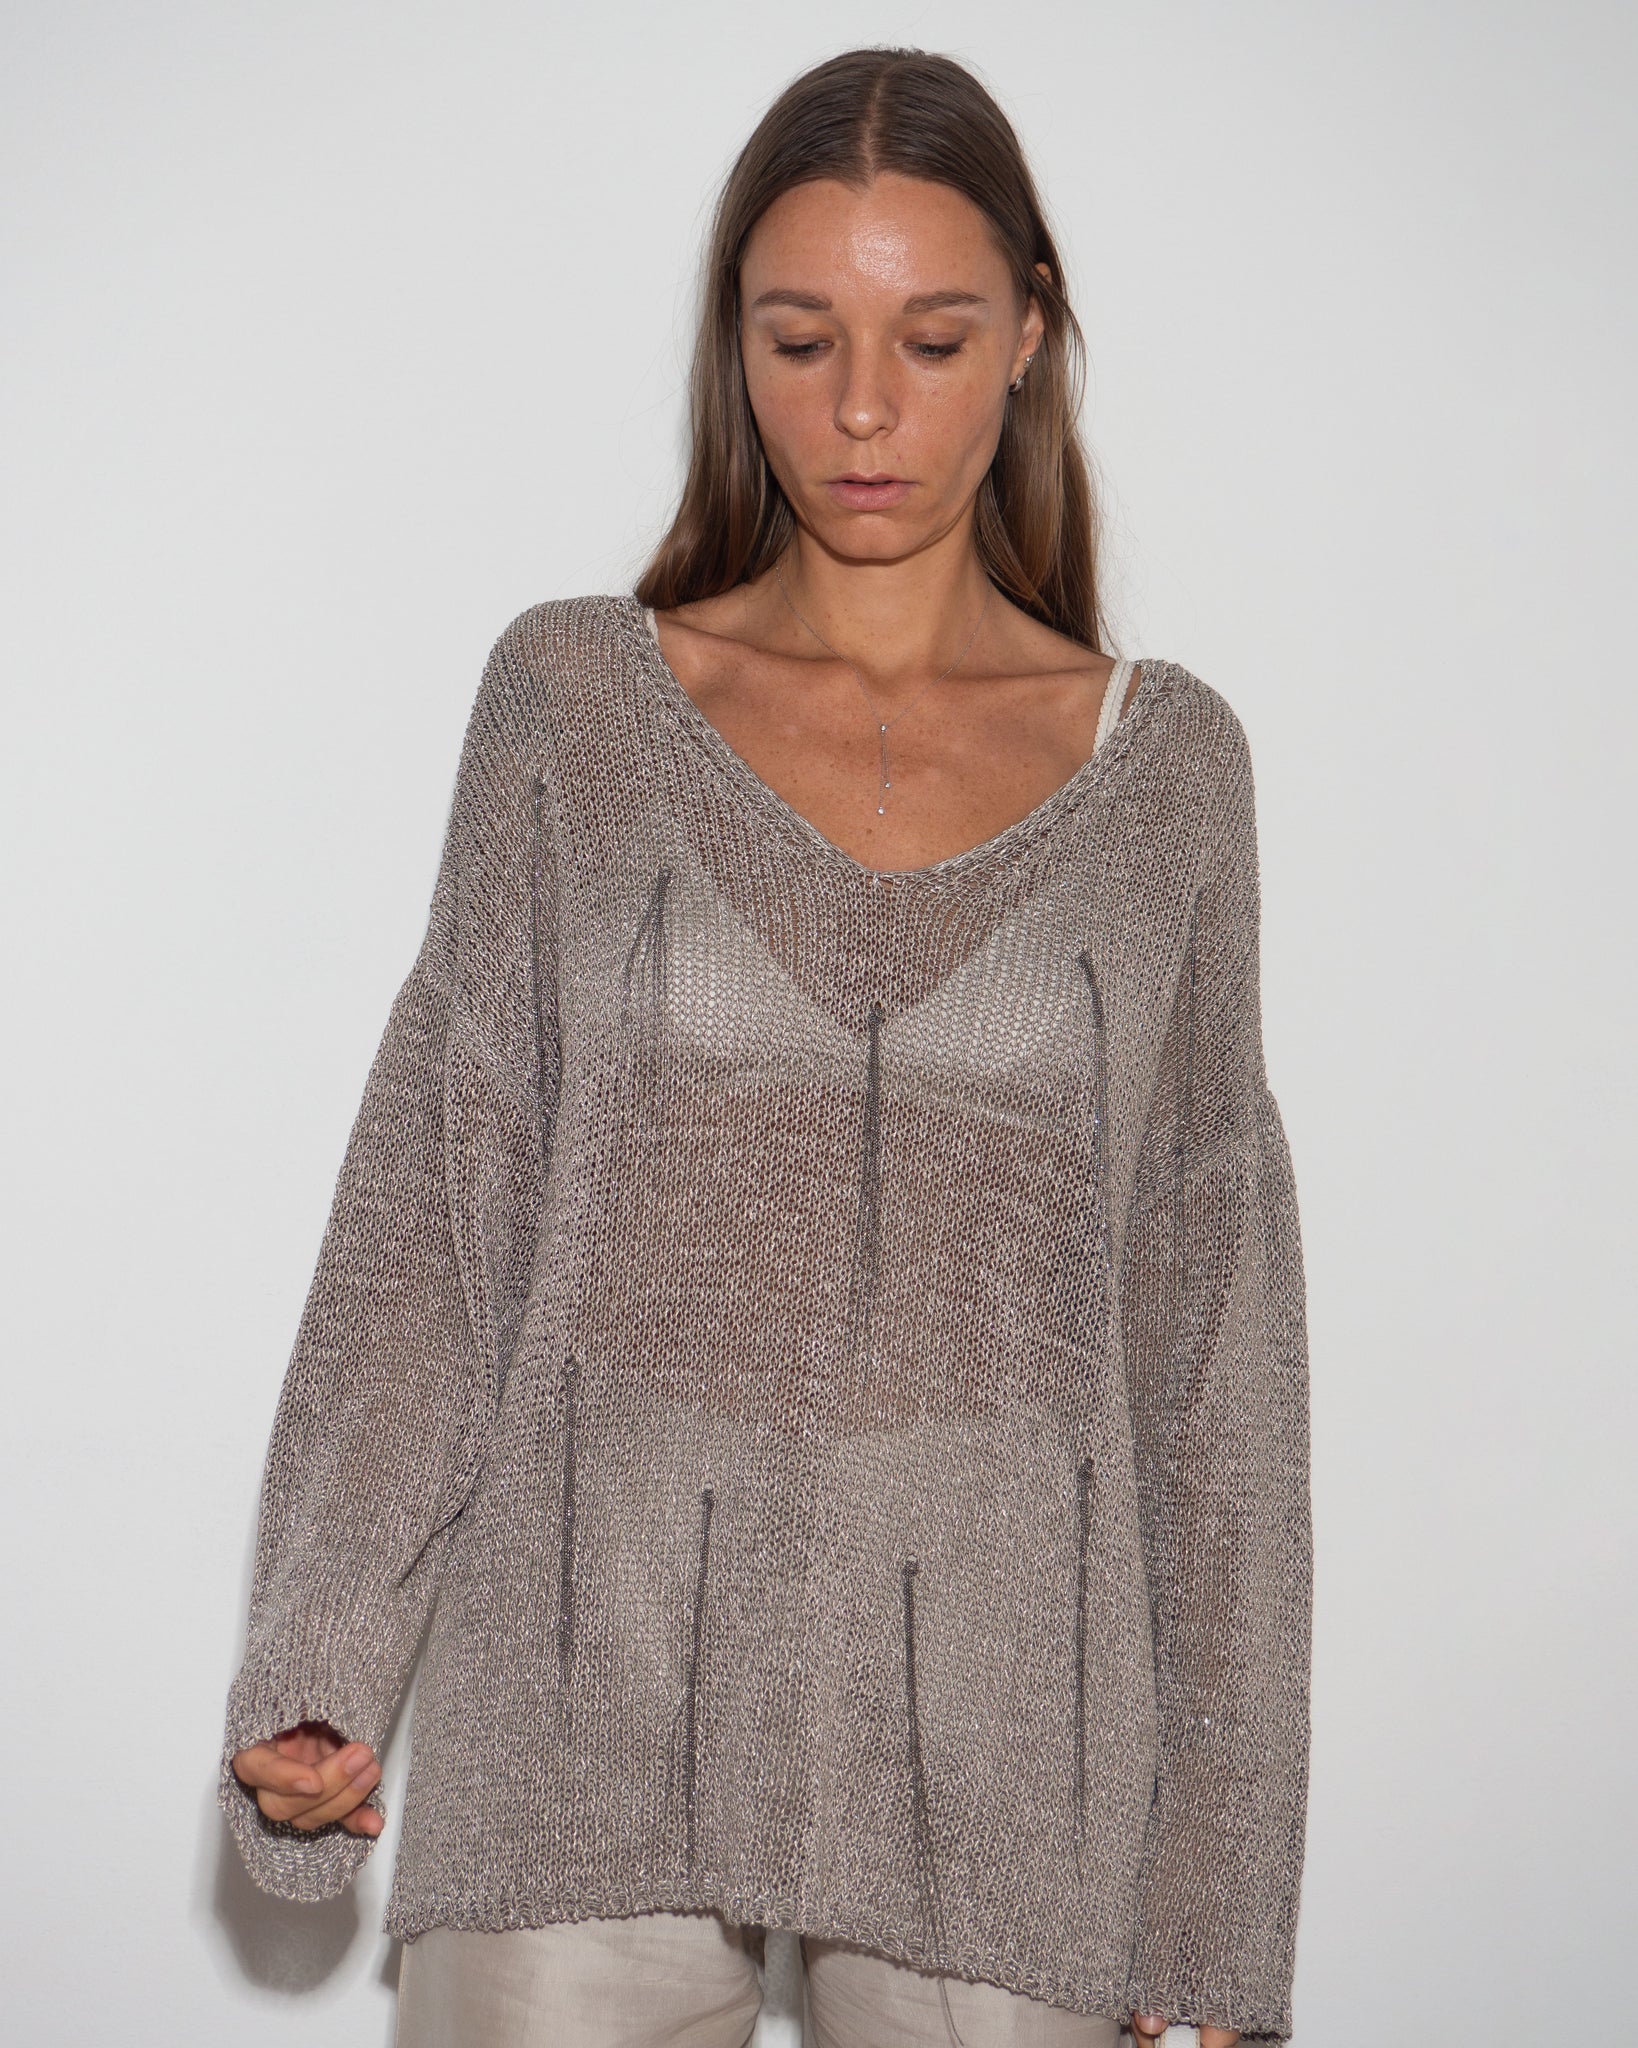 Chainmail Sheer Knit